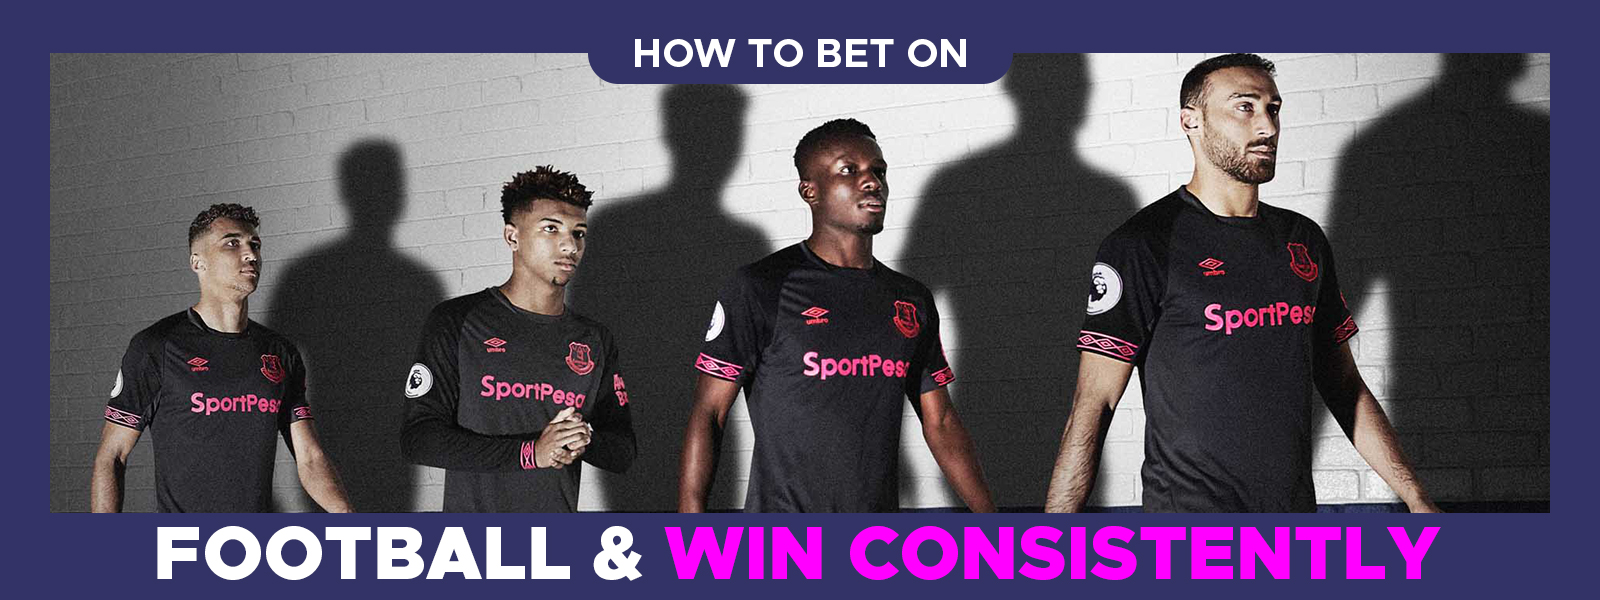 3 Easy Steps To Start Betting on Football & Win